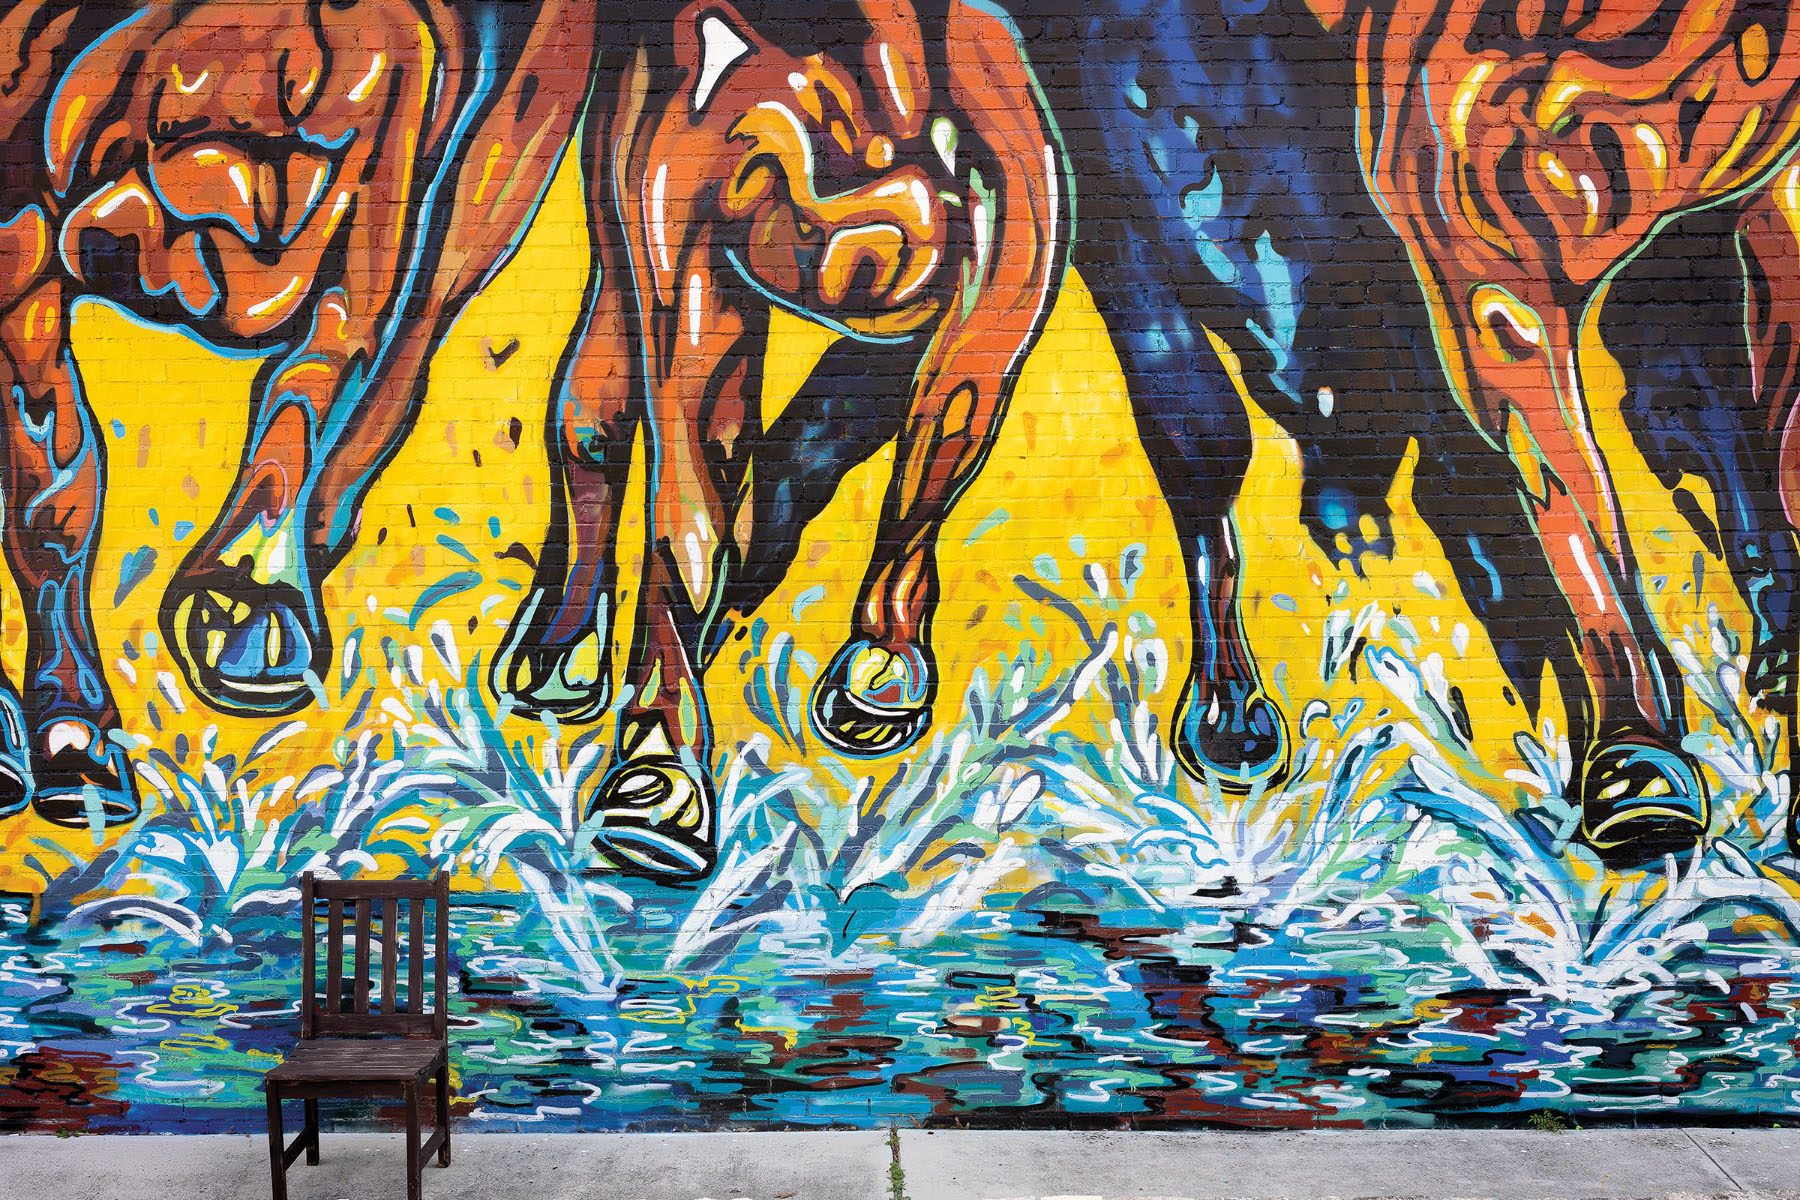 A bright yellow and blue mural of horses hooves running through water